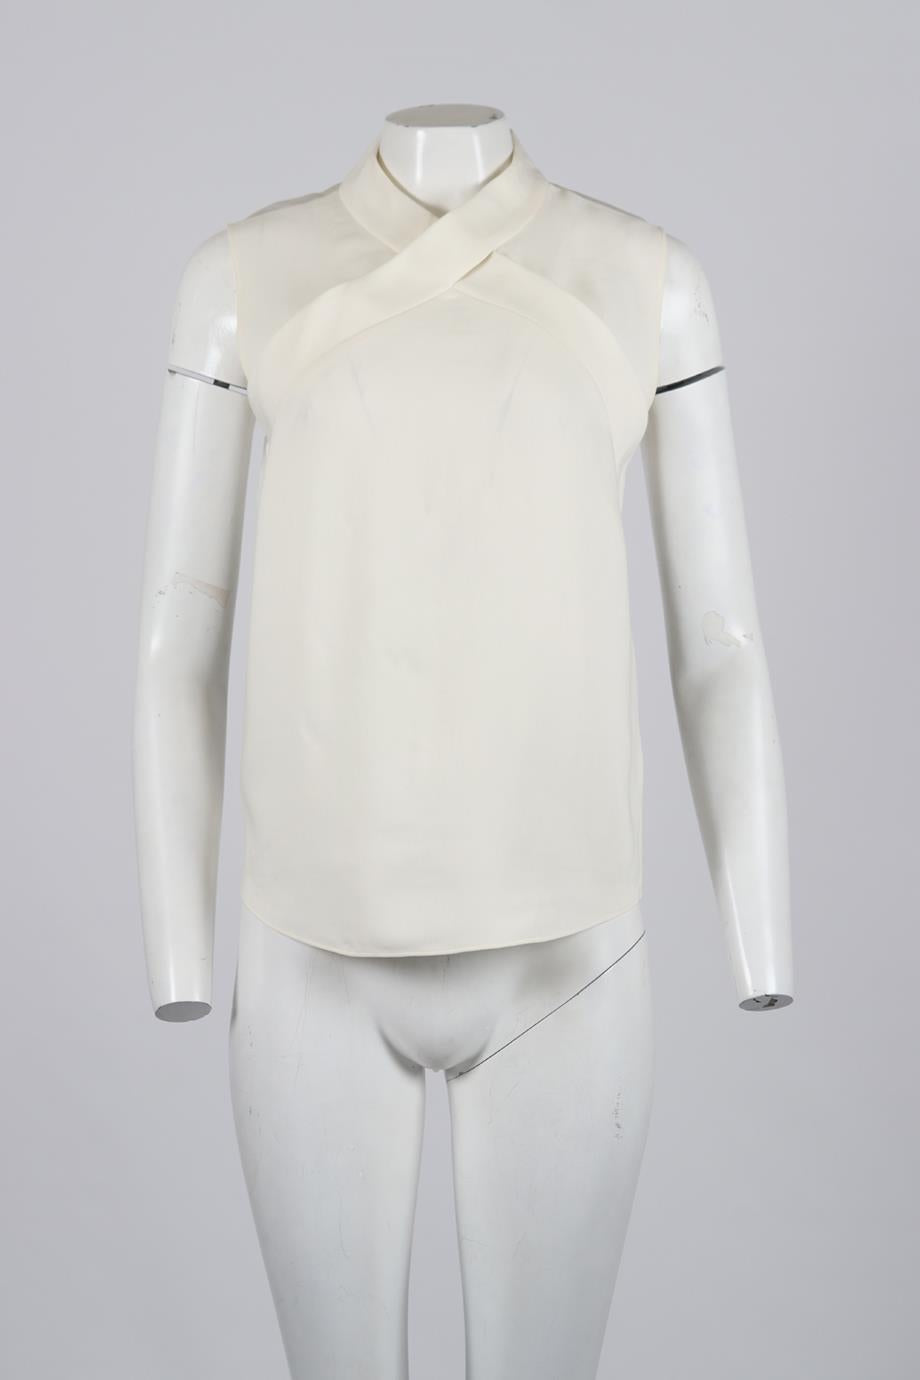 CEDRIC CHARLIER COTTON AND SILK BLEND BLOUSE IT 40 UK 8